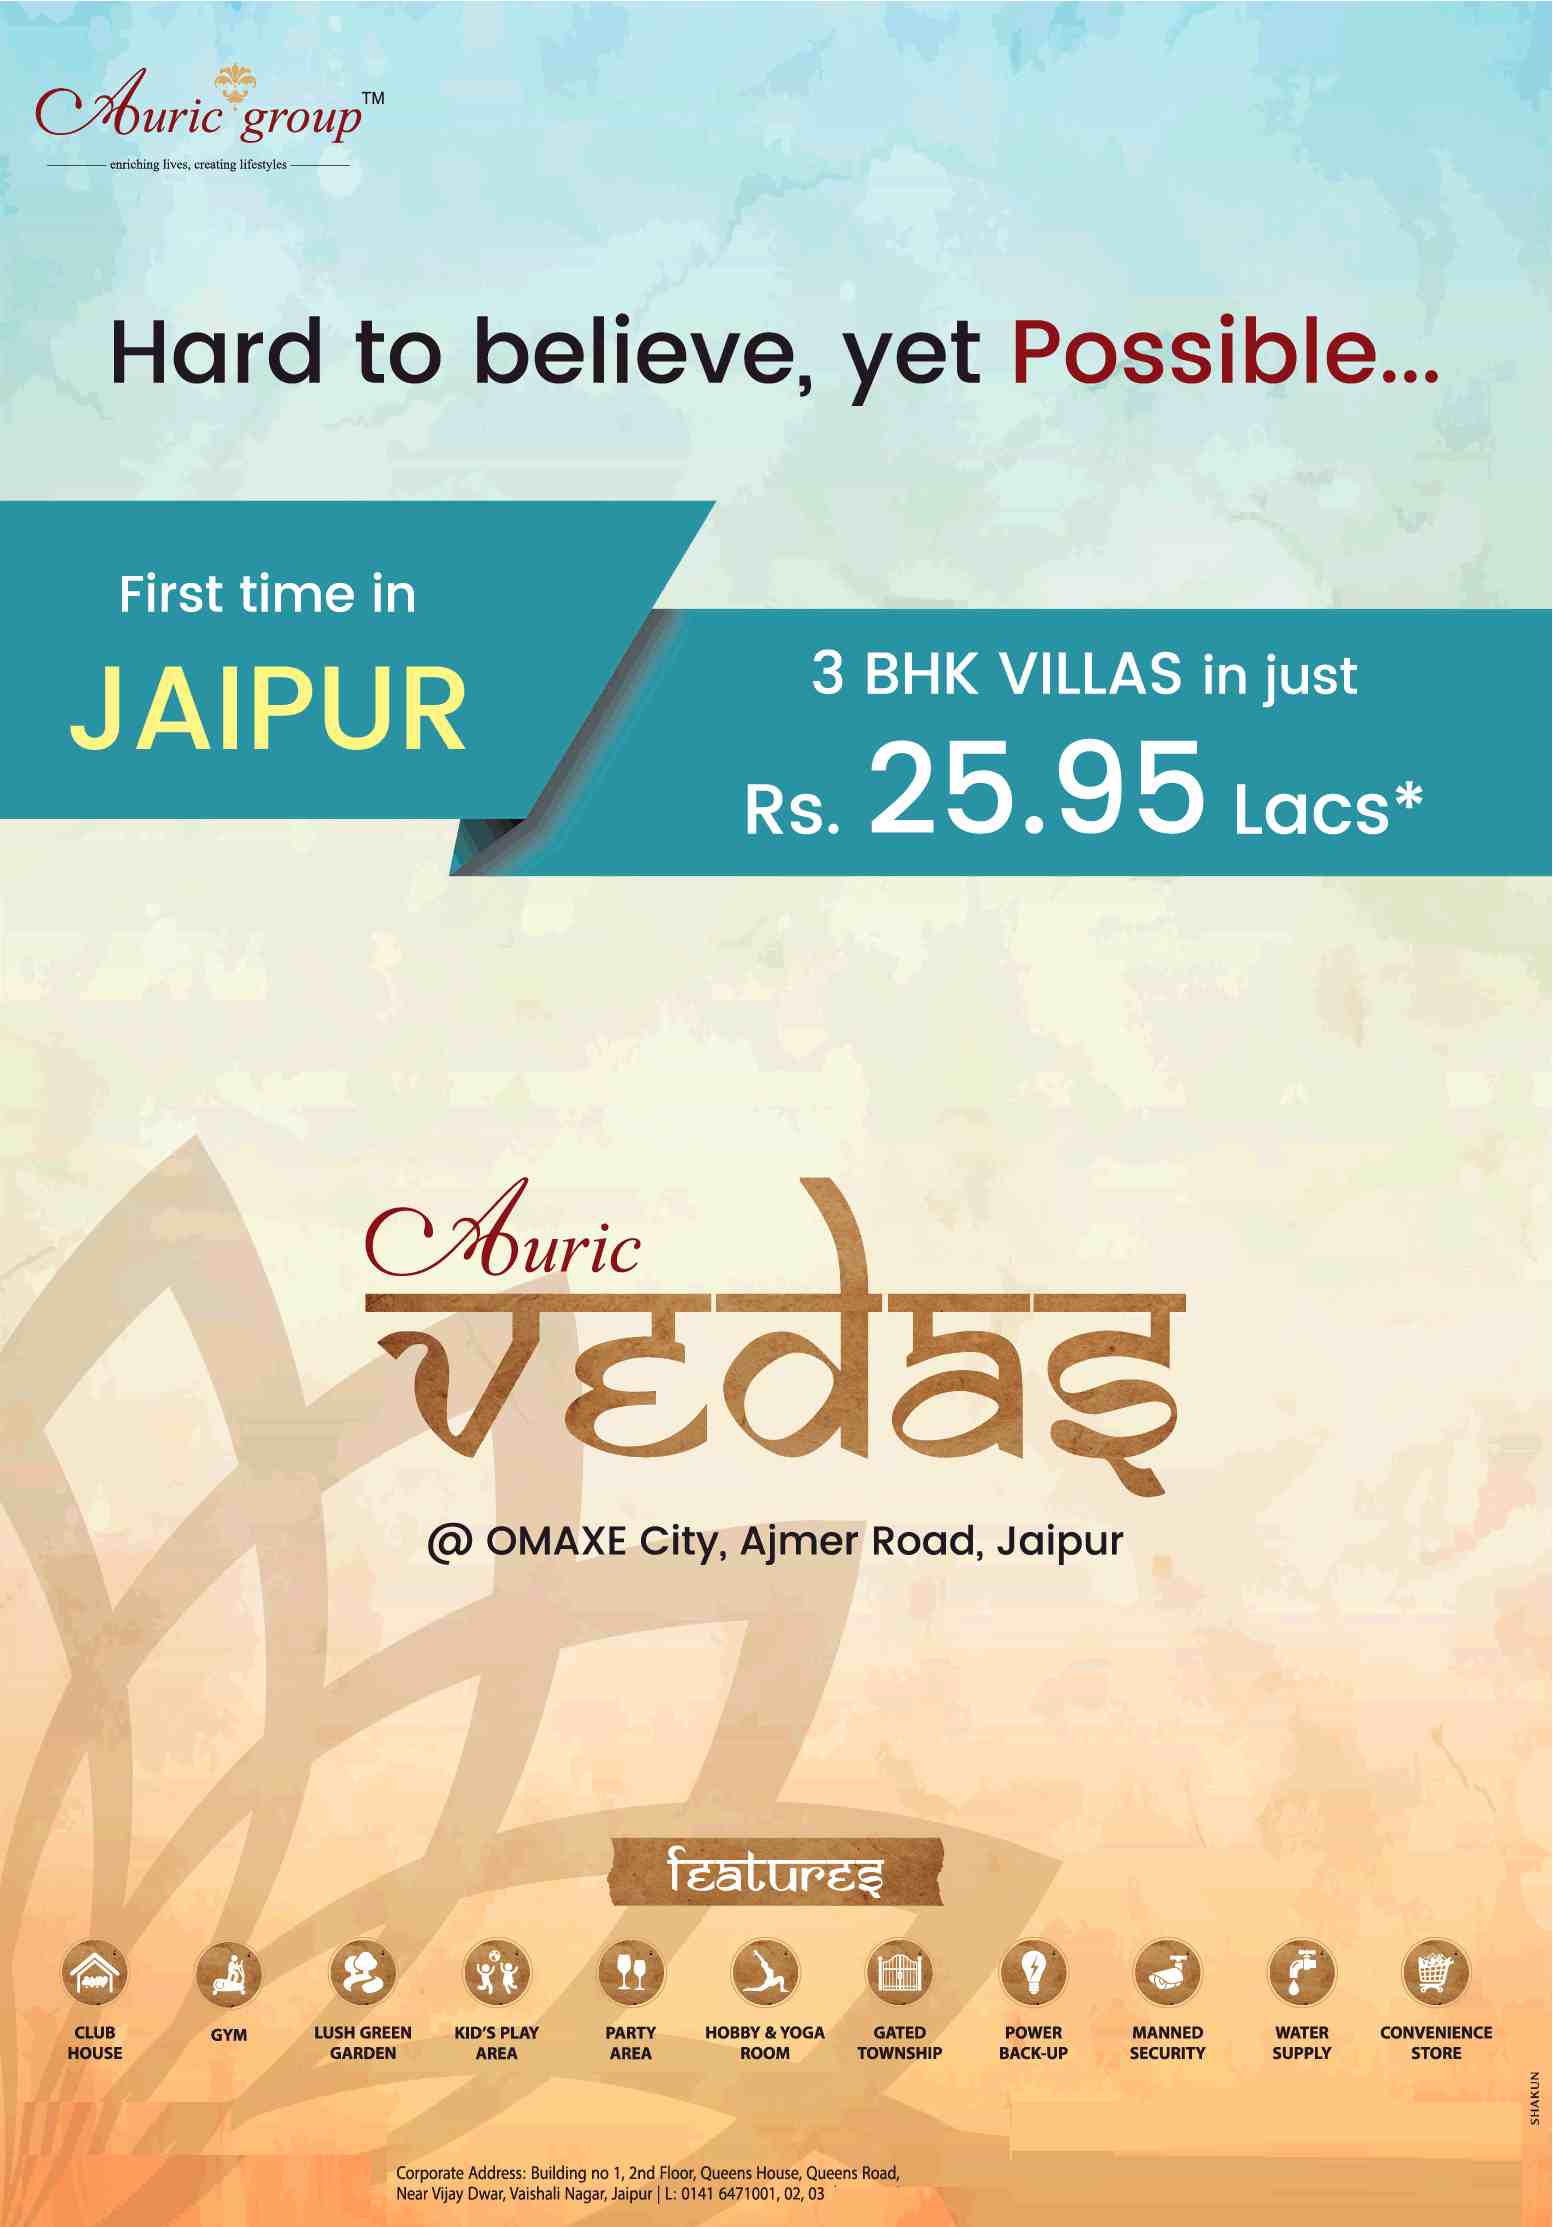 3 BHK Villas for just Rs. 25.95 lacs is hard to believe but yet possible at Auric Vedas in Jaipur